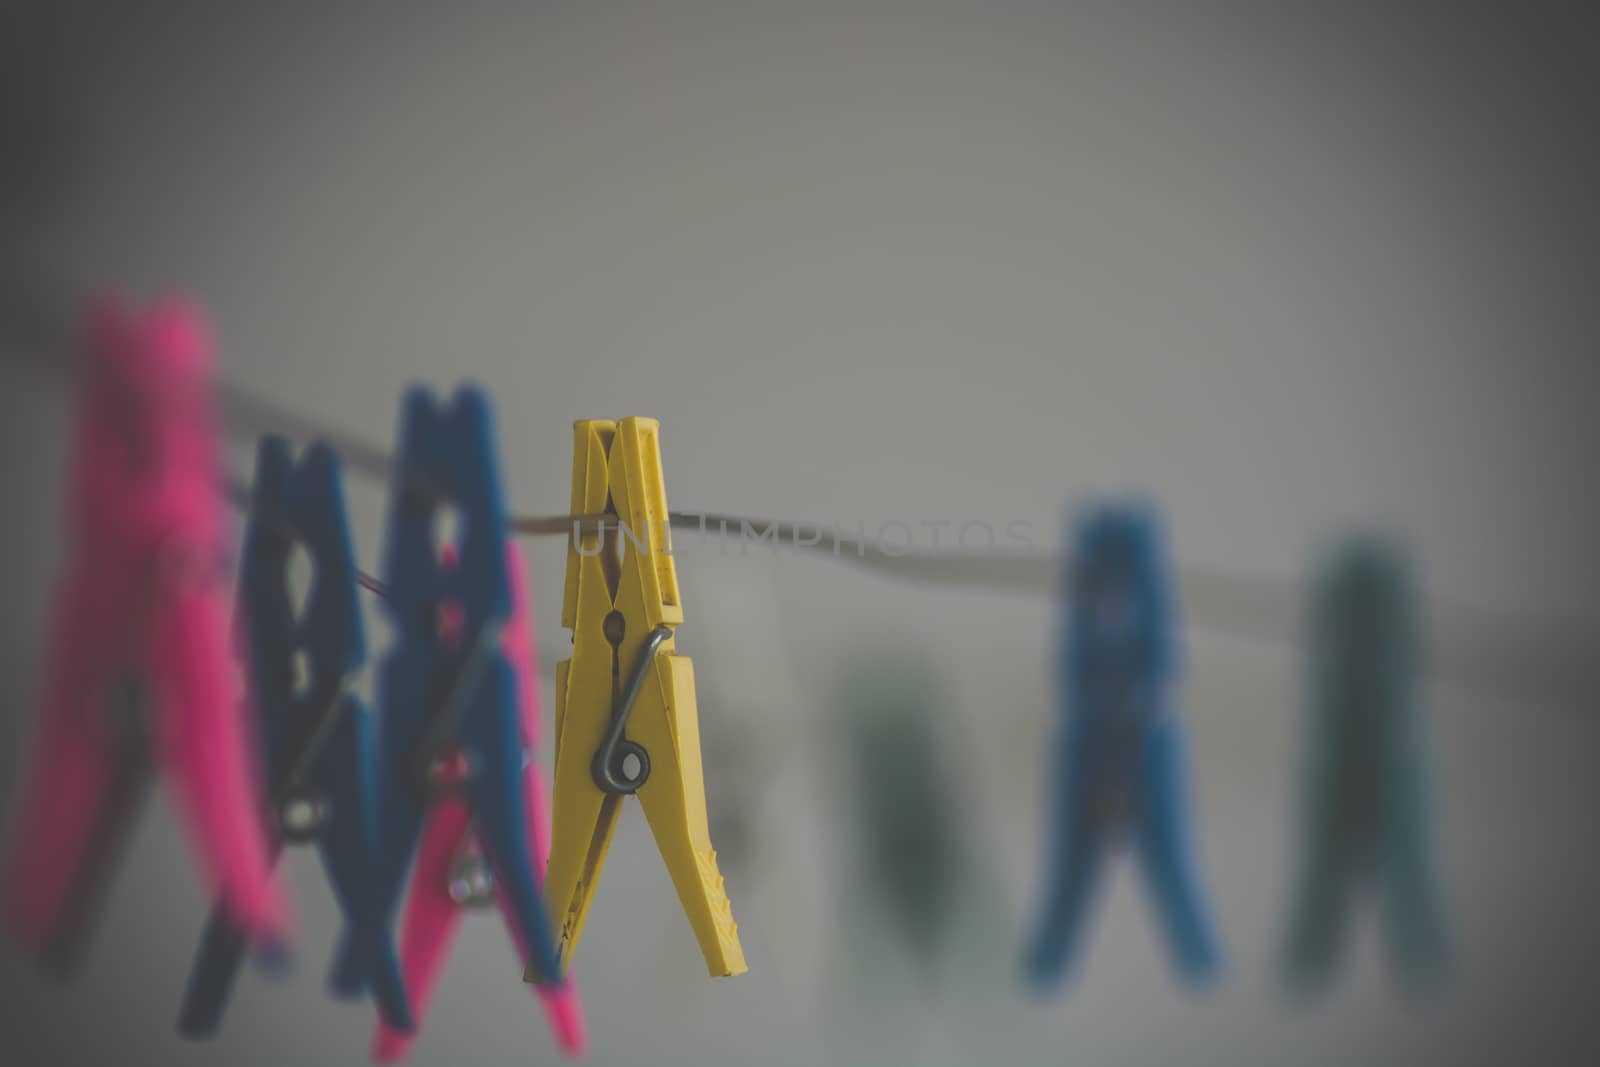 Many pegs for laundry bundled together with the yellow peg on focus.